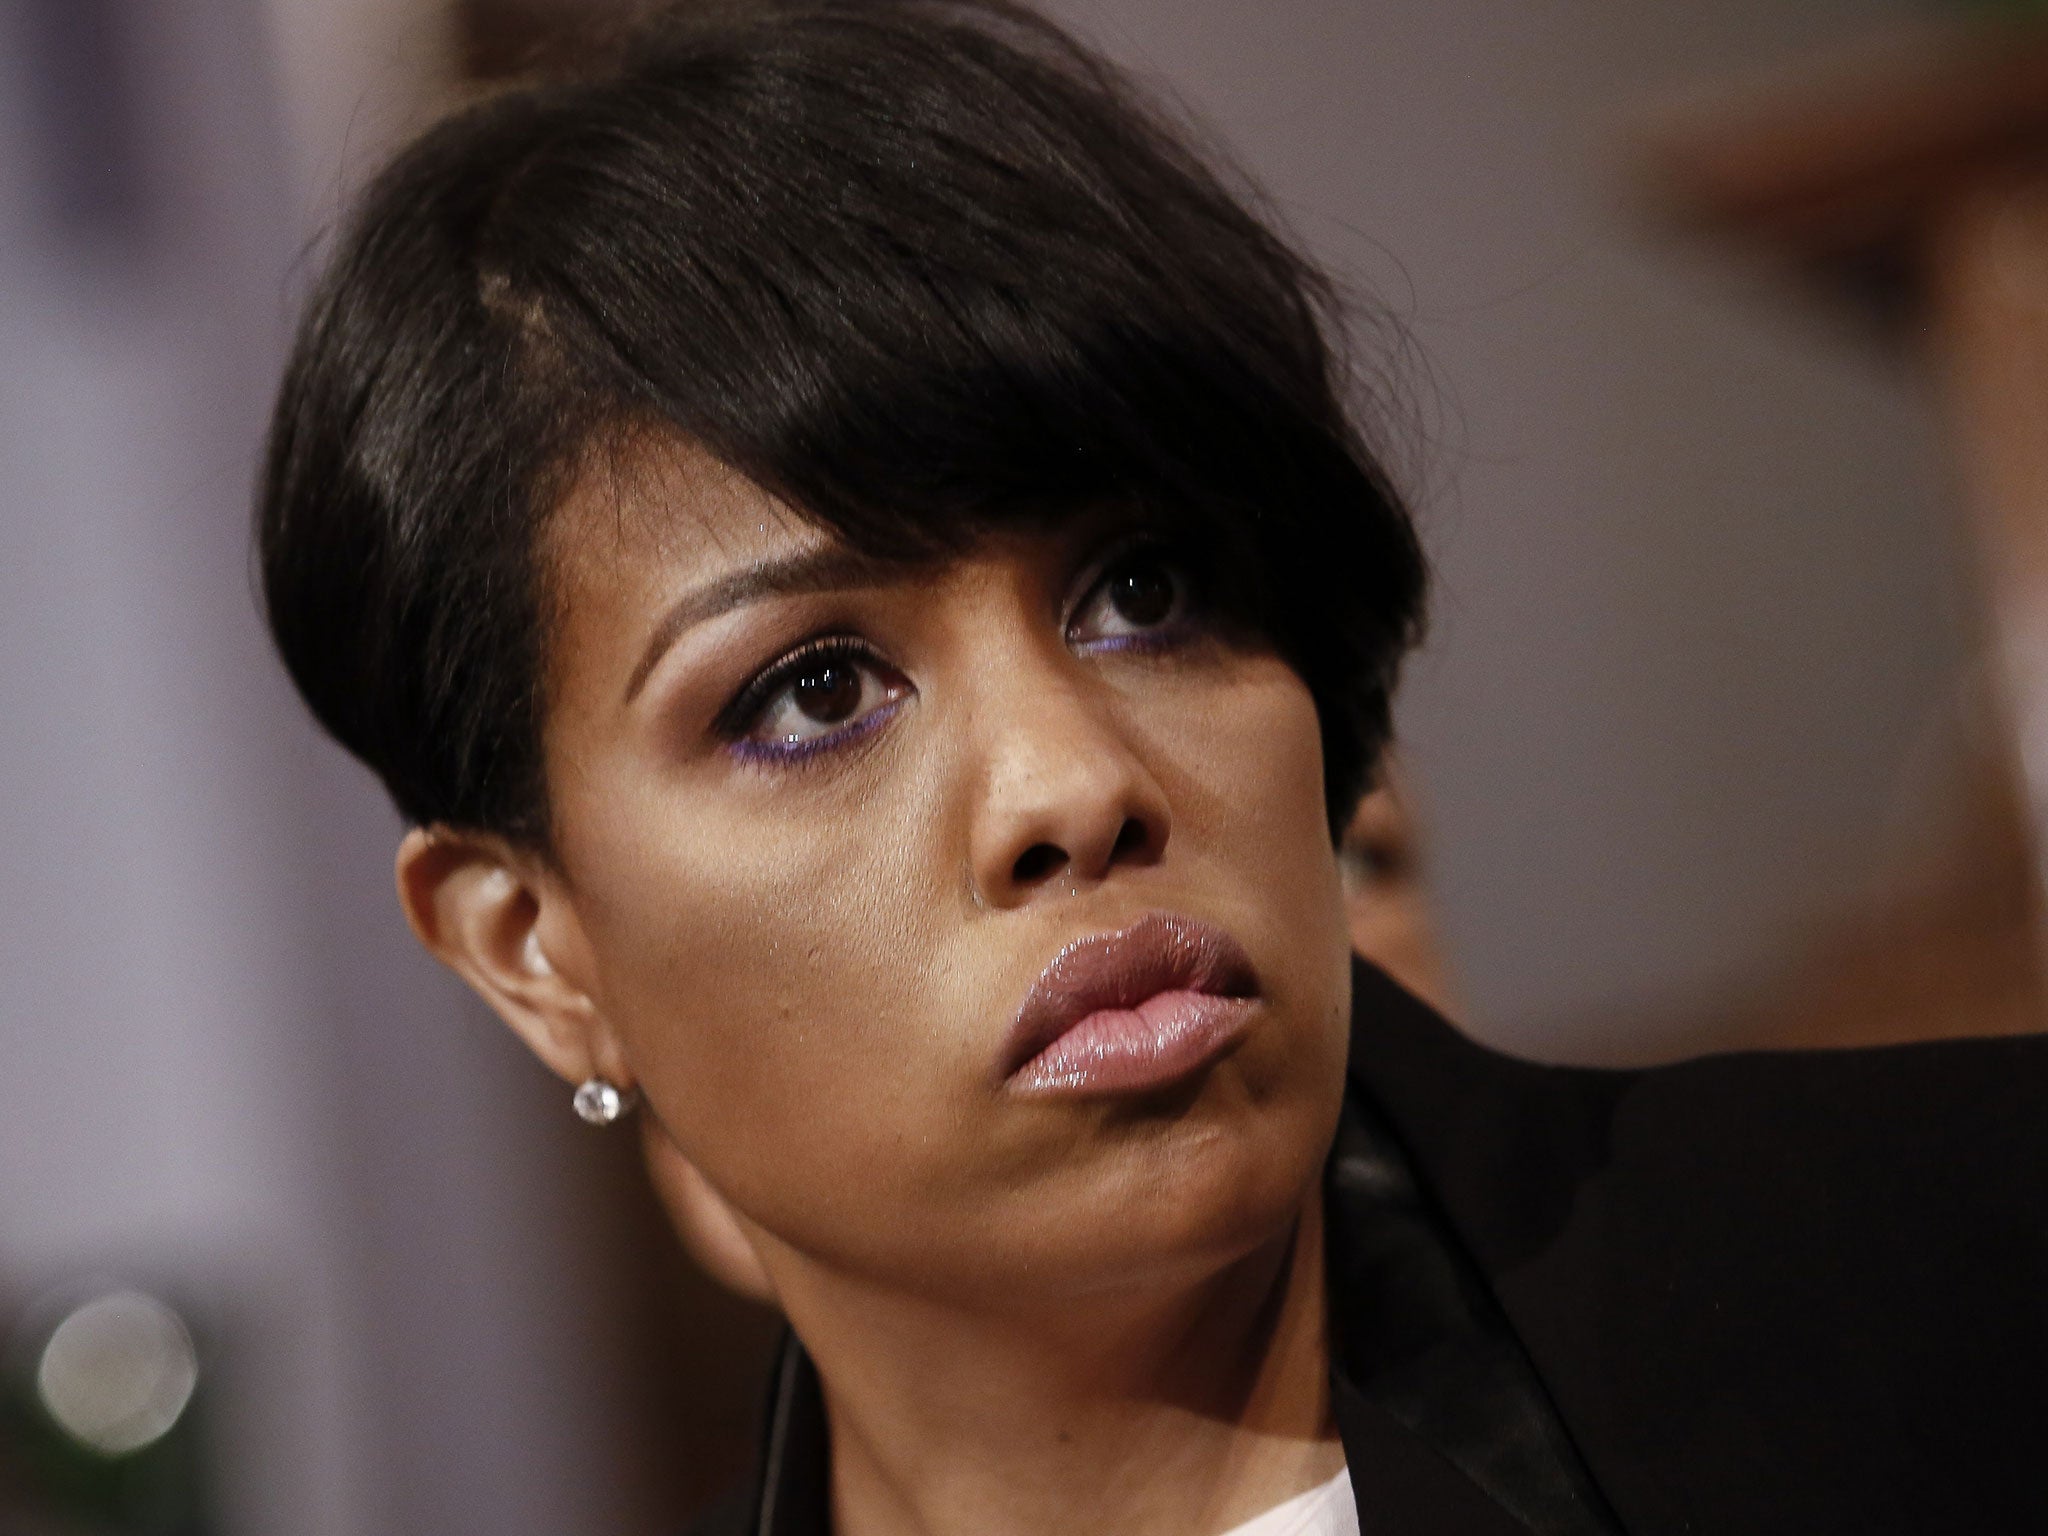 Baltimore mayor Stephanie Rawlings-Blake has been forced to clarify her comments